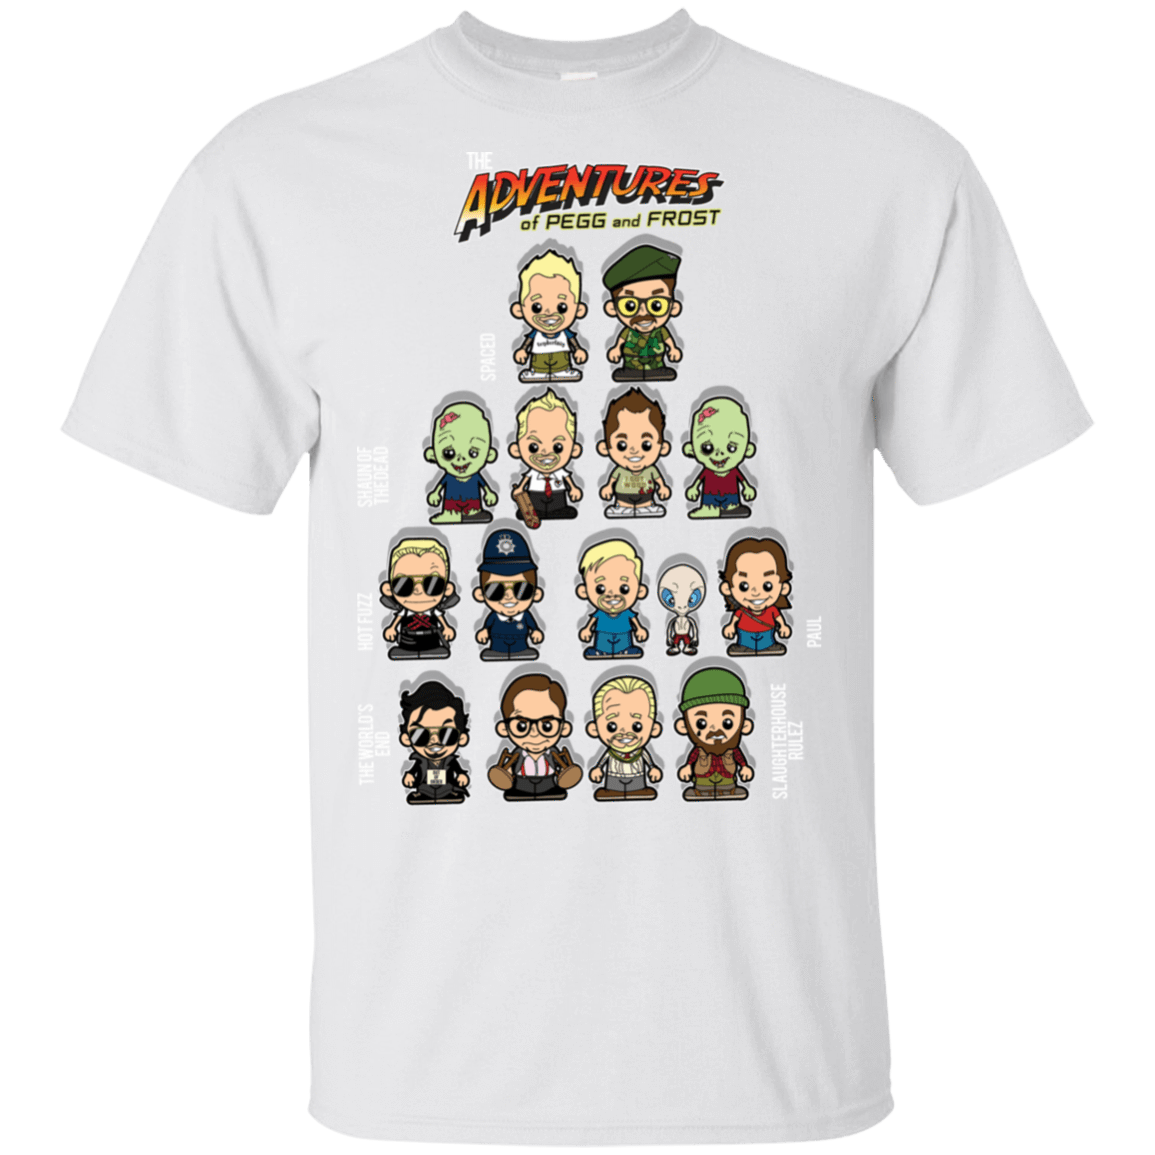 T-Shirts White / S The Adventures of Pegg and Frost T-Shirt